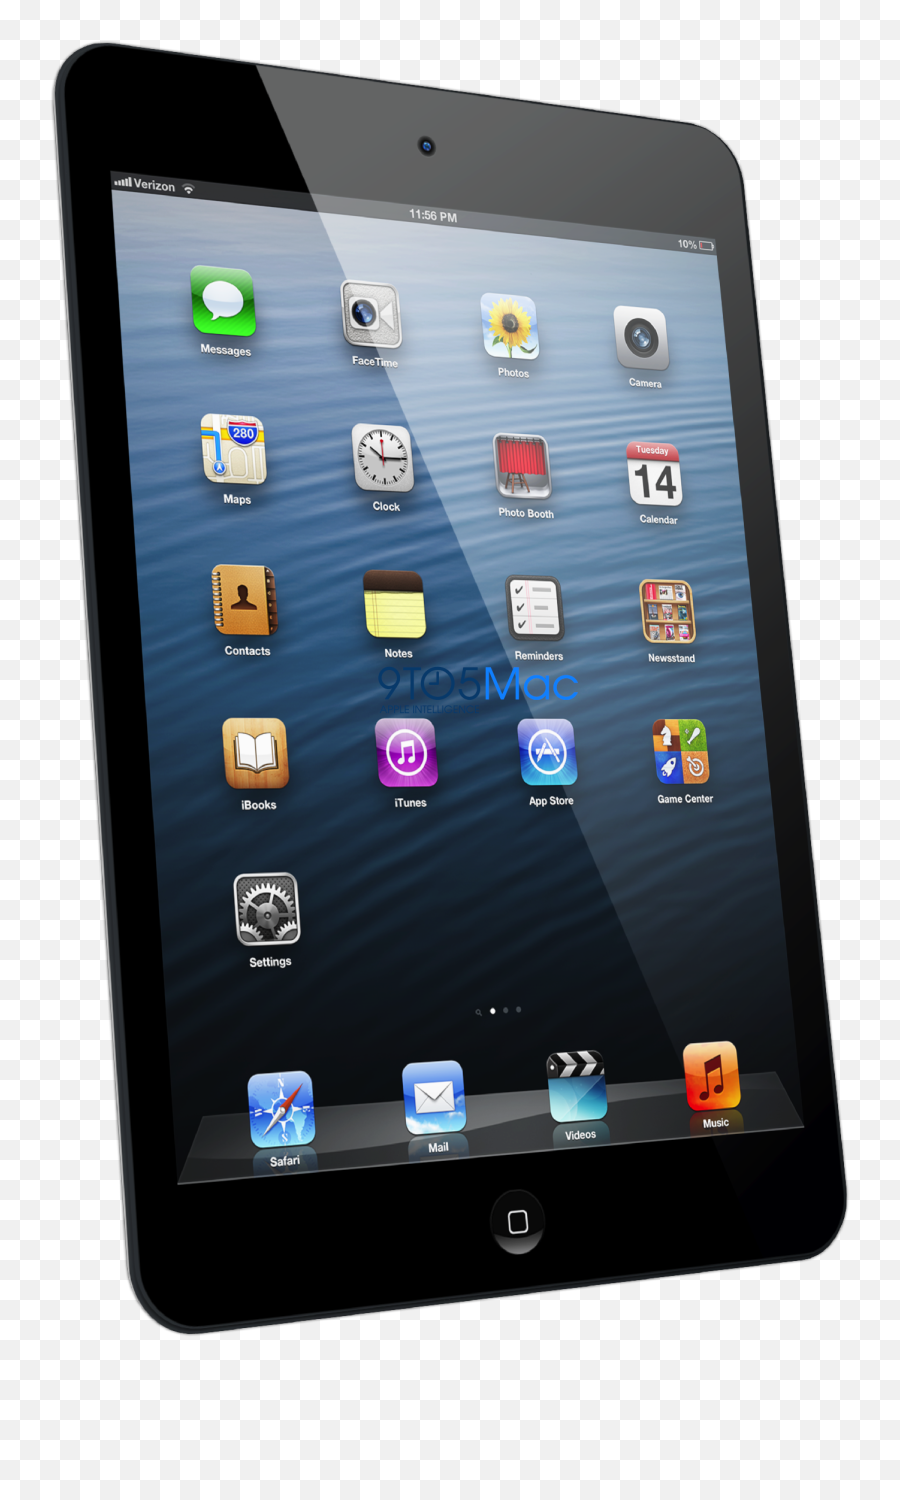 Apples Smaller Ipad To Likely Start At - Transparent Tablet 3d Png Emoji,How To Get Emojis On Ipad